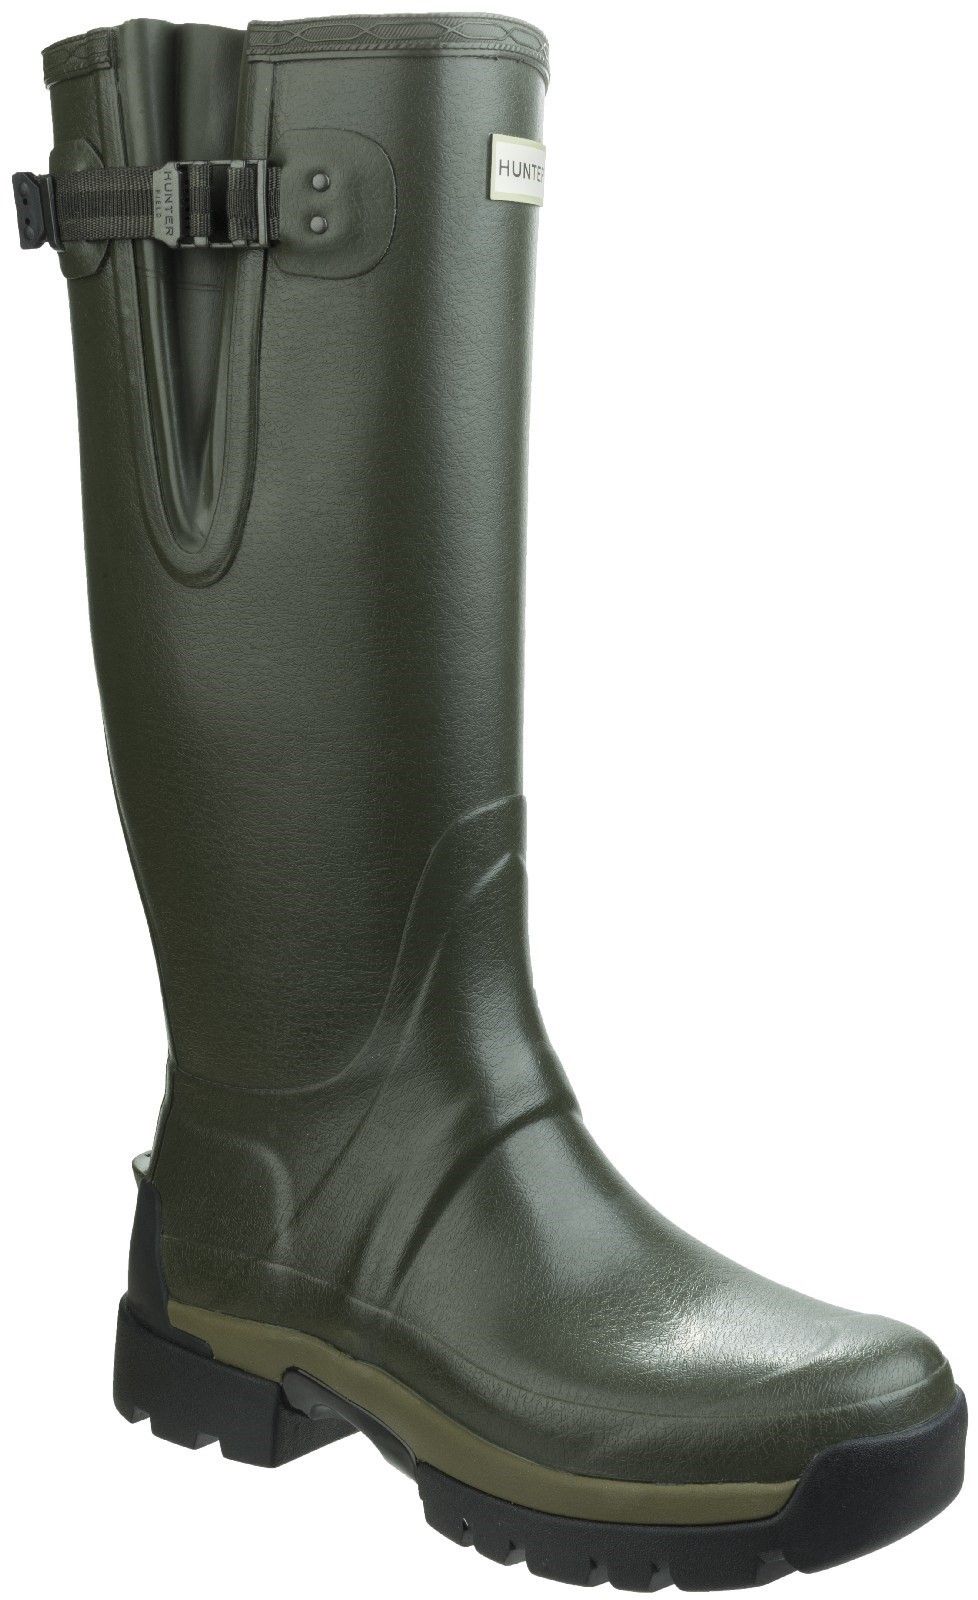 Built with specialised technical elements, the boot is handcrafted from a new soft rubber compound, featuring an adjustable side gusset to adapt the fit of the leg and a 3mm neoprene lining for insulation. This is a performance style with high durability. 
Handcrafted. 
Waterproof. 
Performance Vibram outsole. 
Adjustable gusset at the leg.